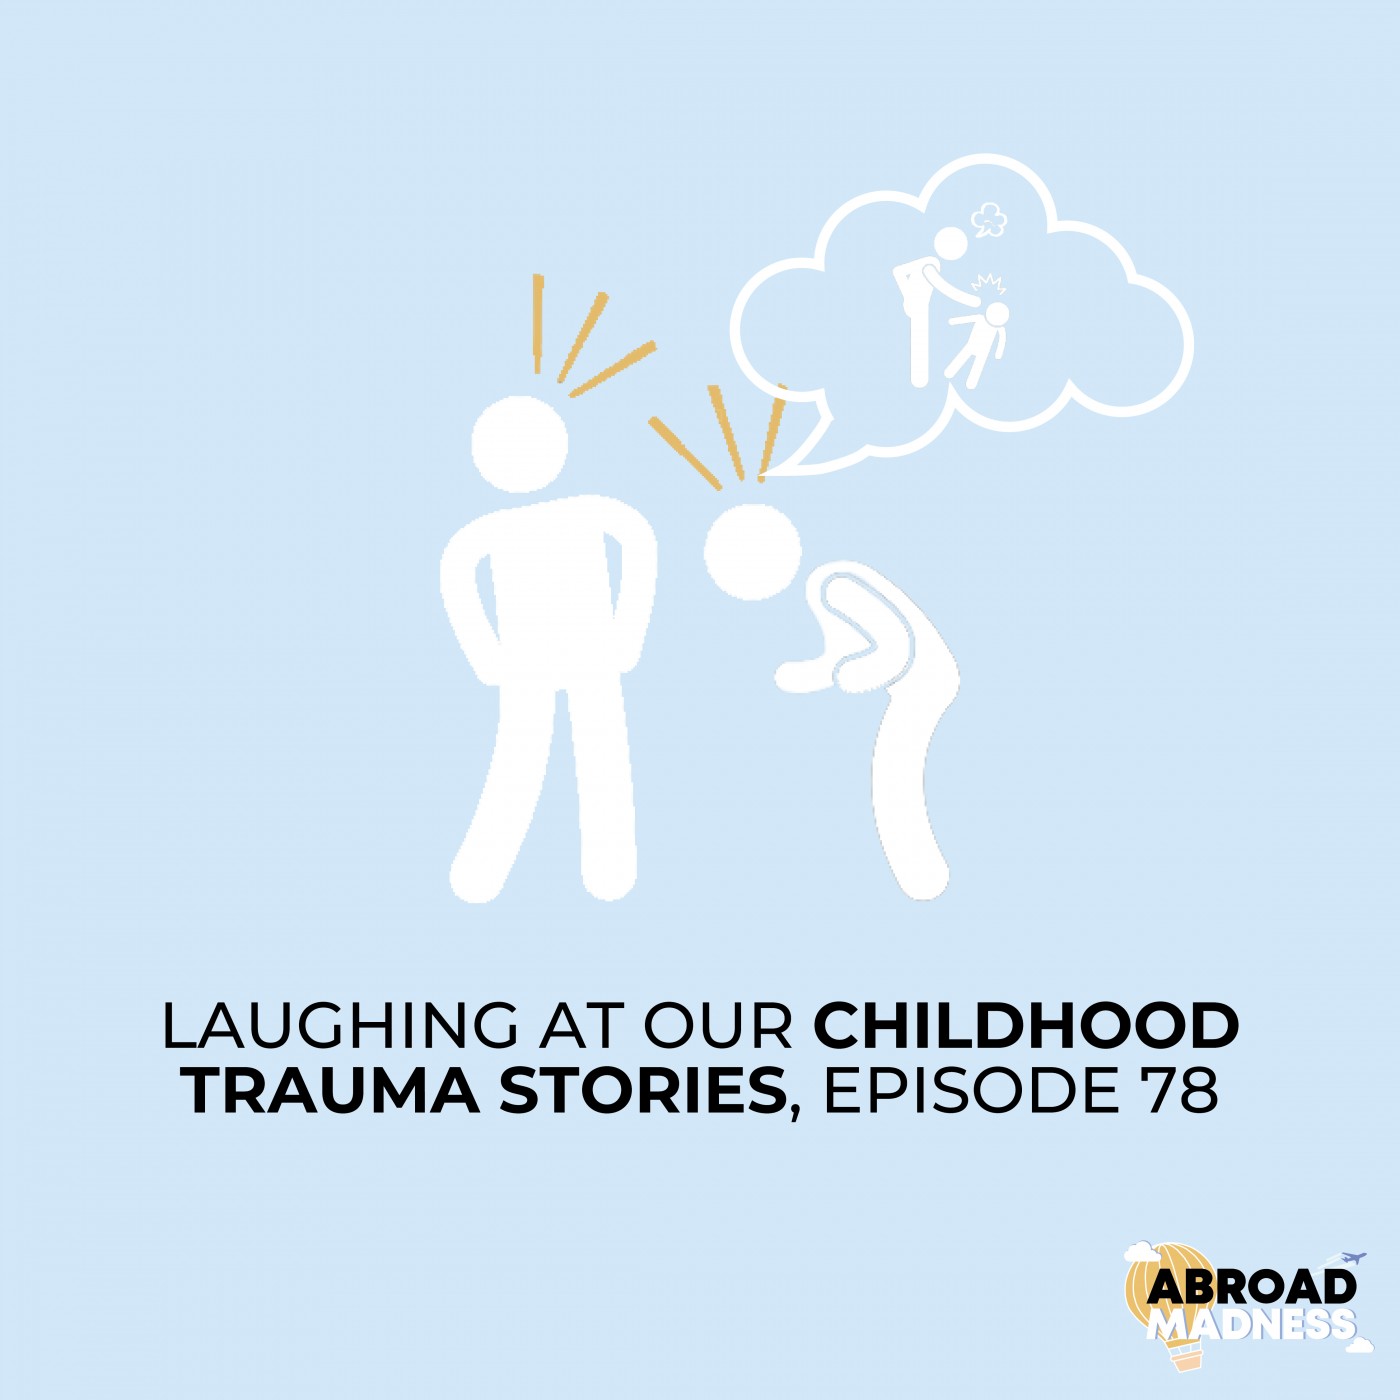 Laughing at our childhood trauma stories, Episode 78